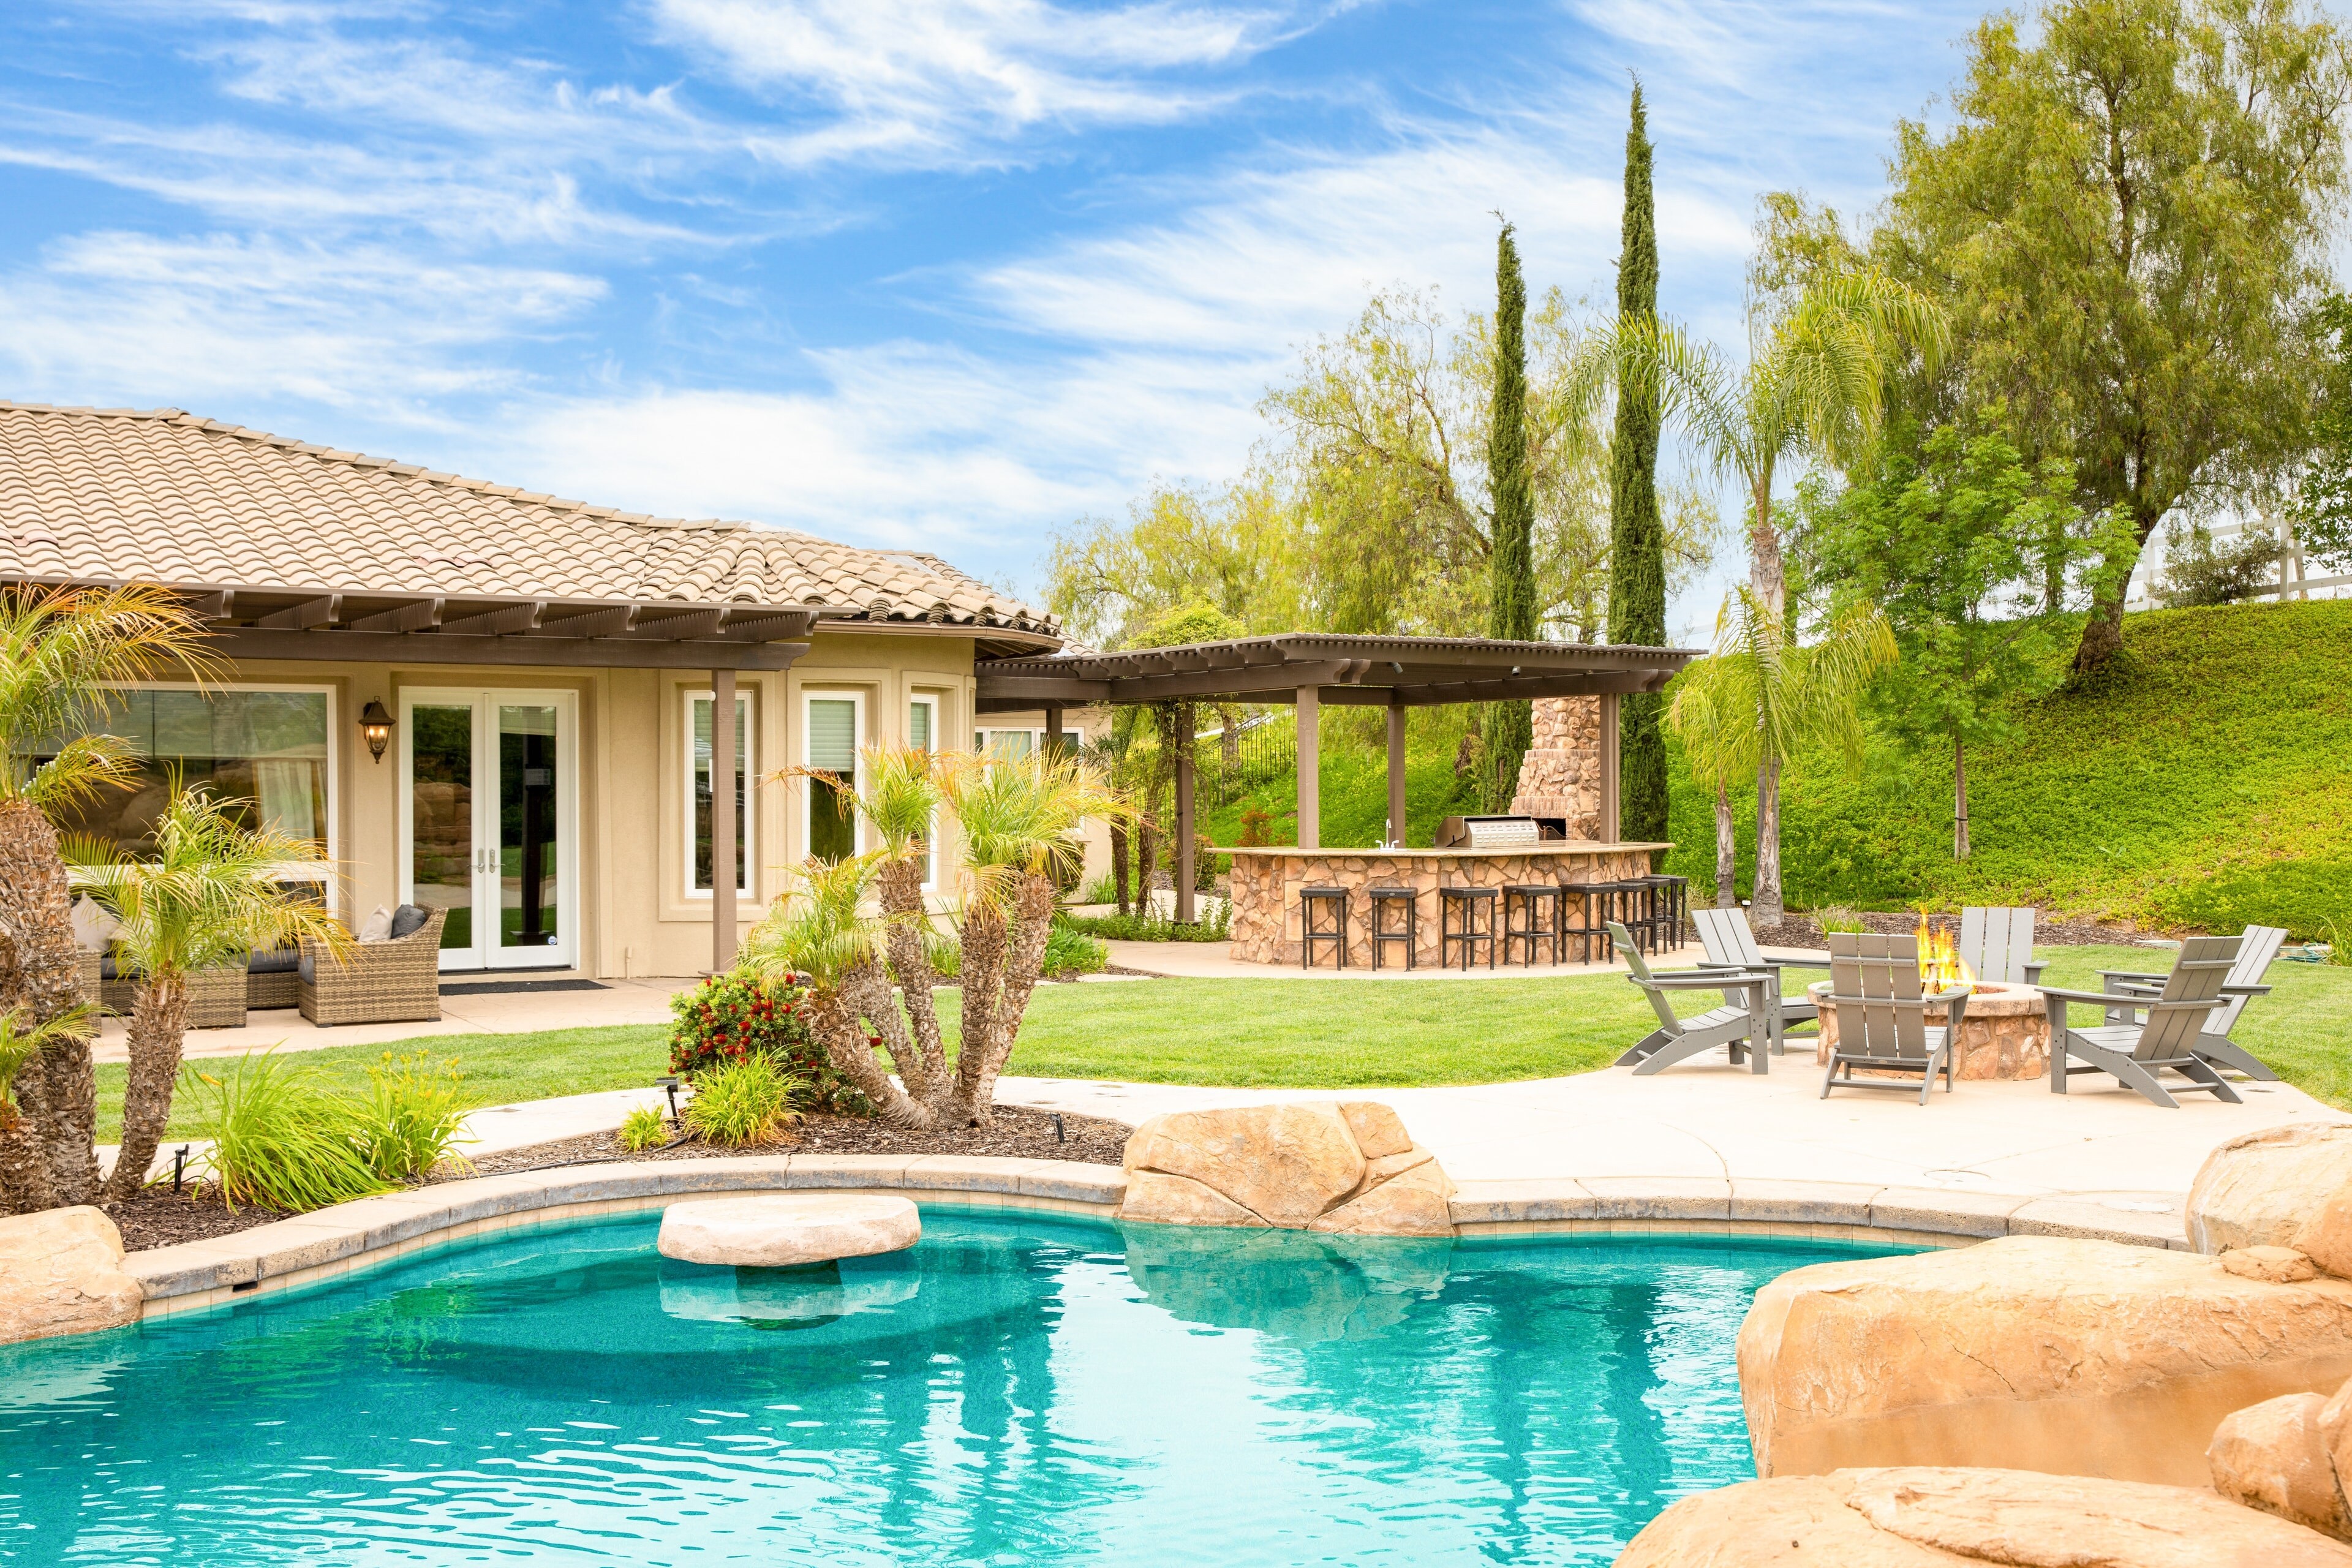 The private entertainer's backyard features a pool, hot tub, and plenty of lounge spaces to enjoy the outdoors.